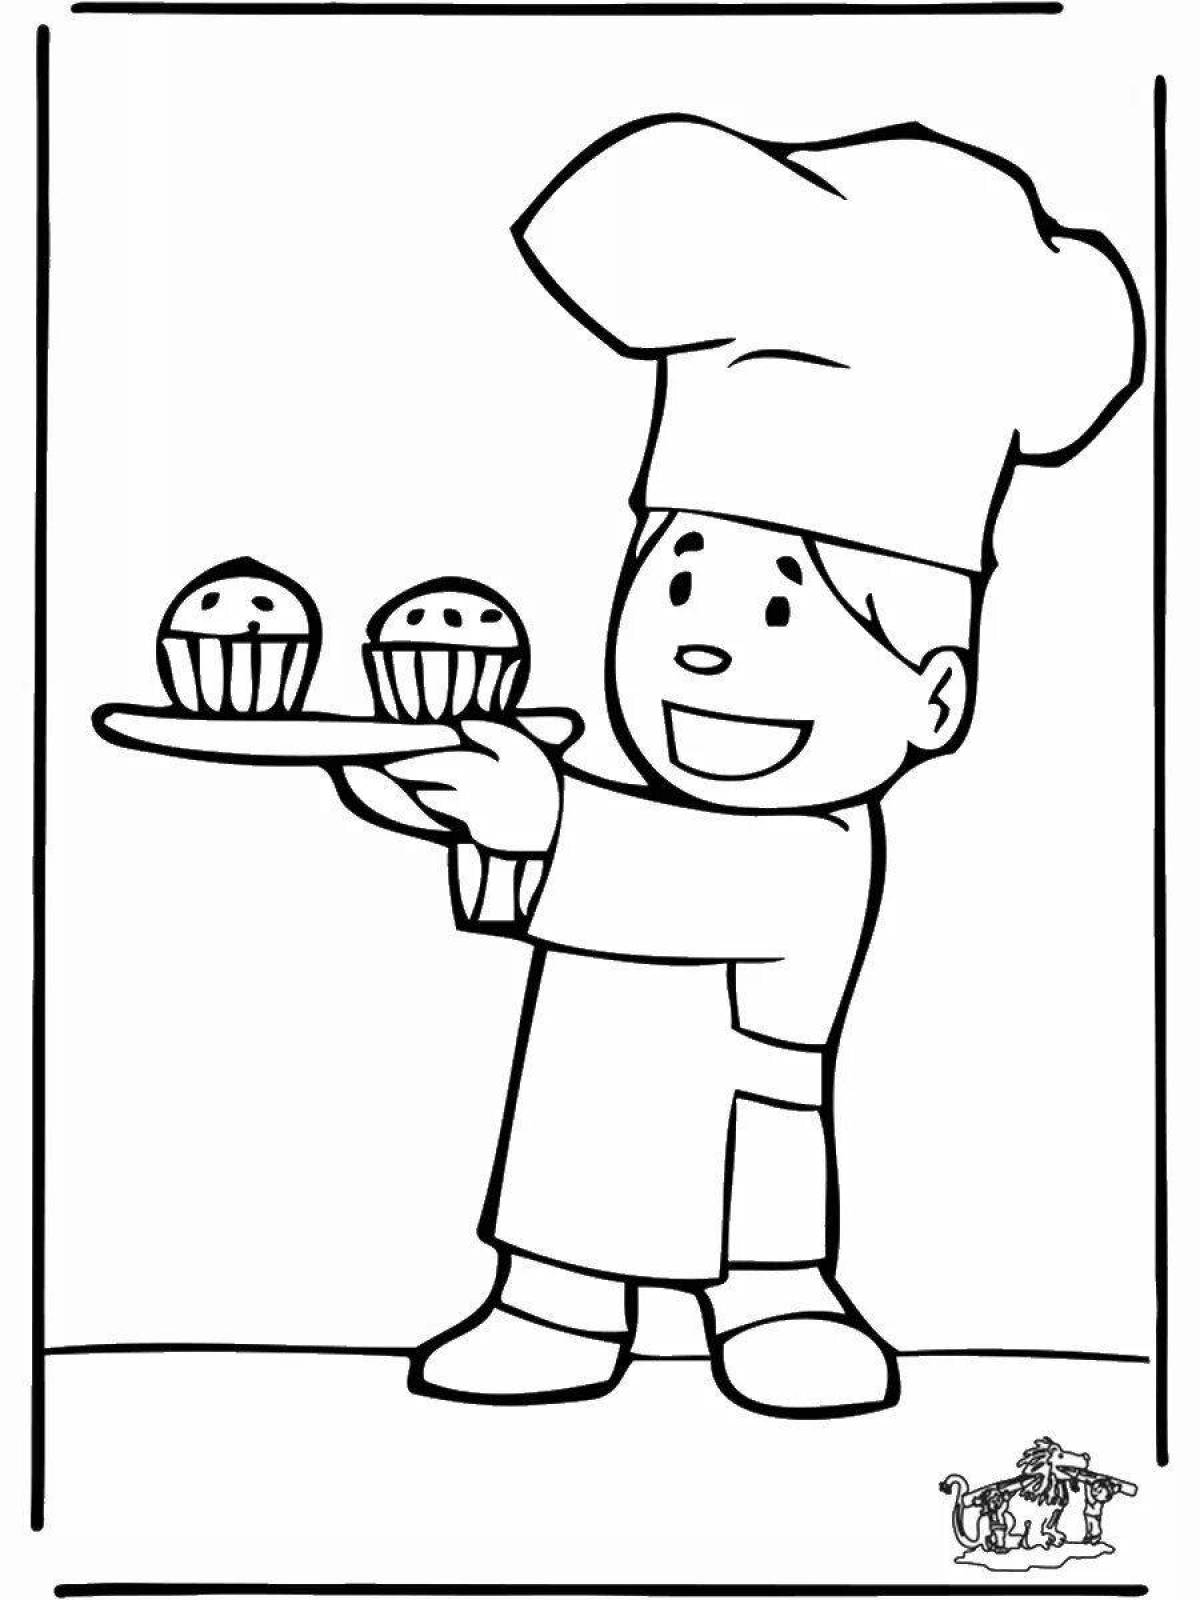 Coloring creative pastry chef profession